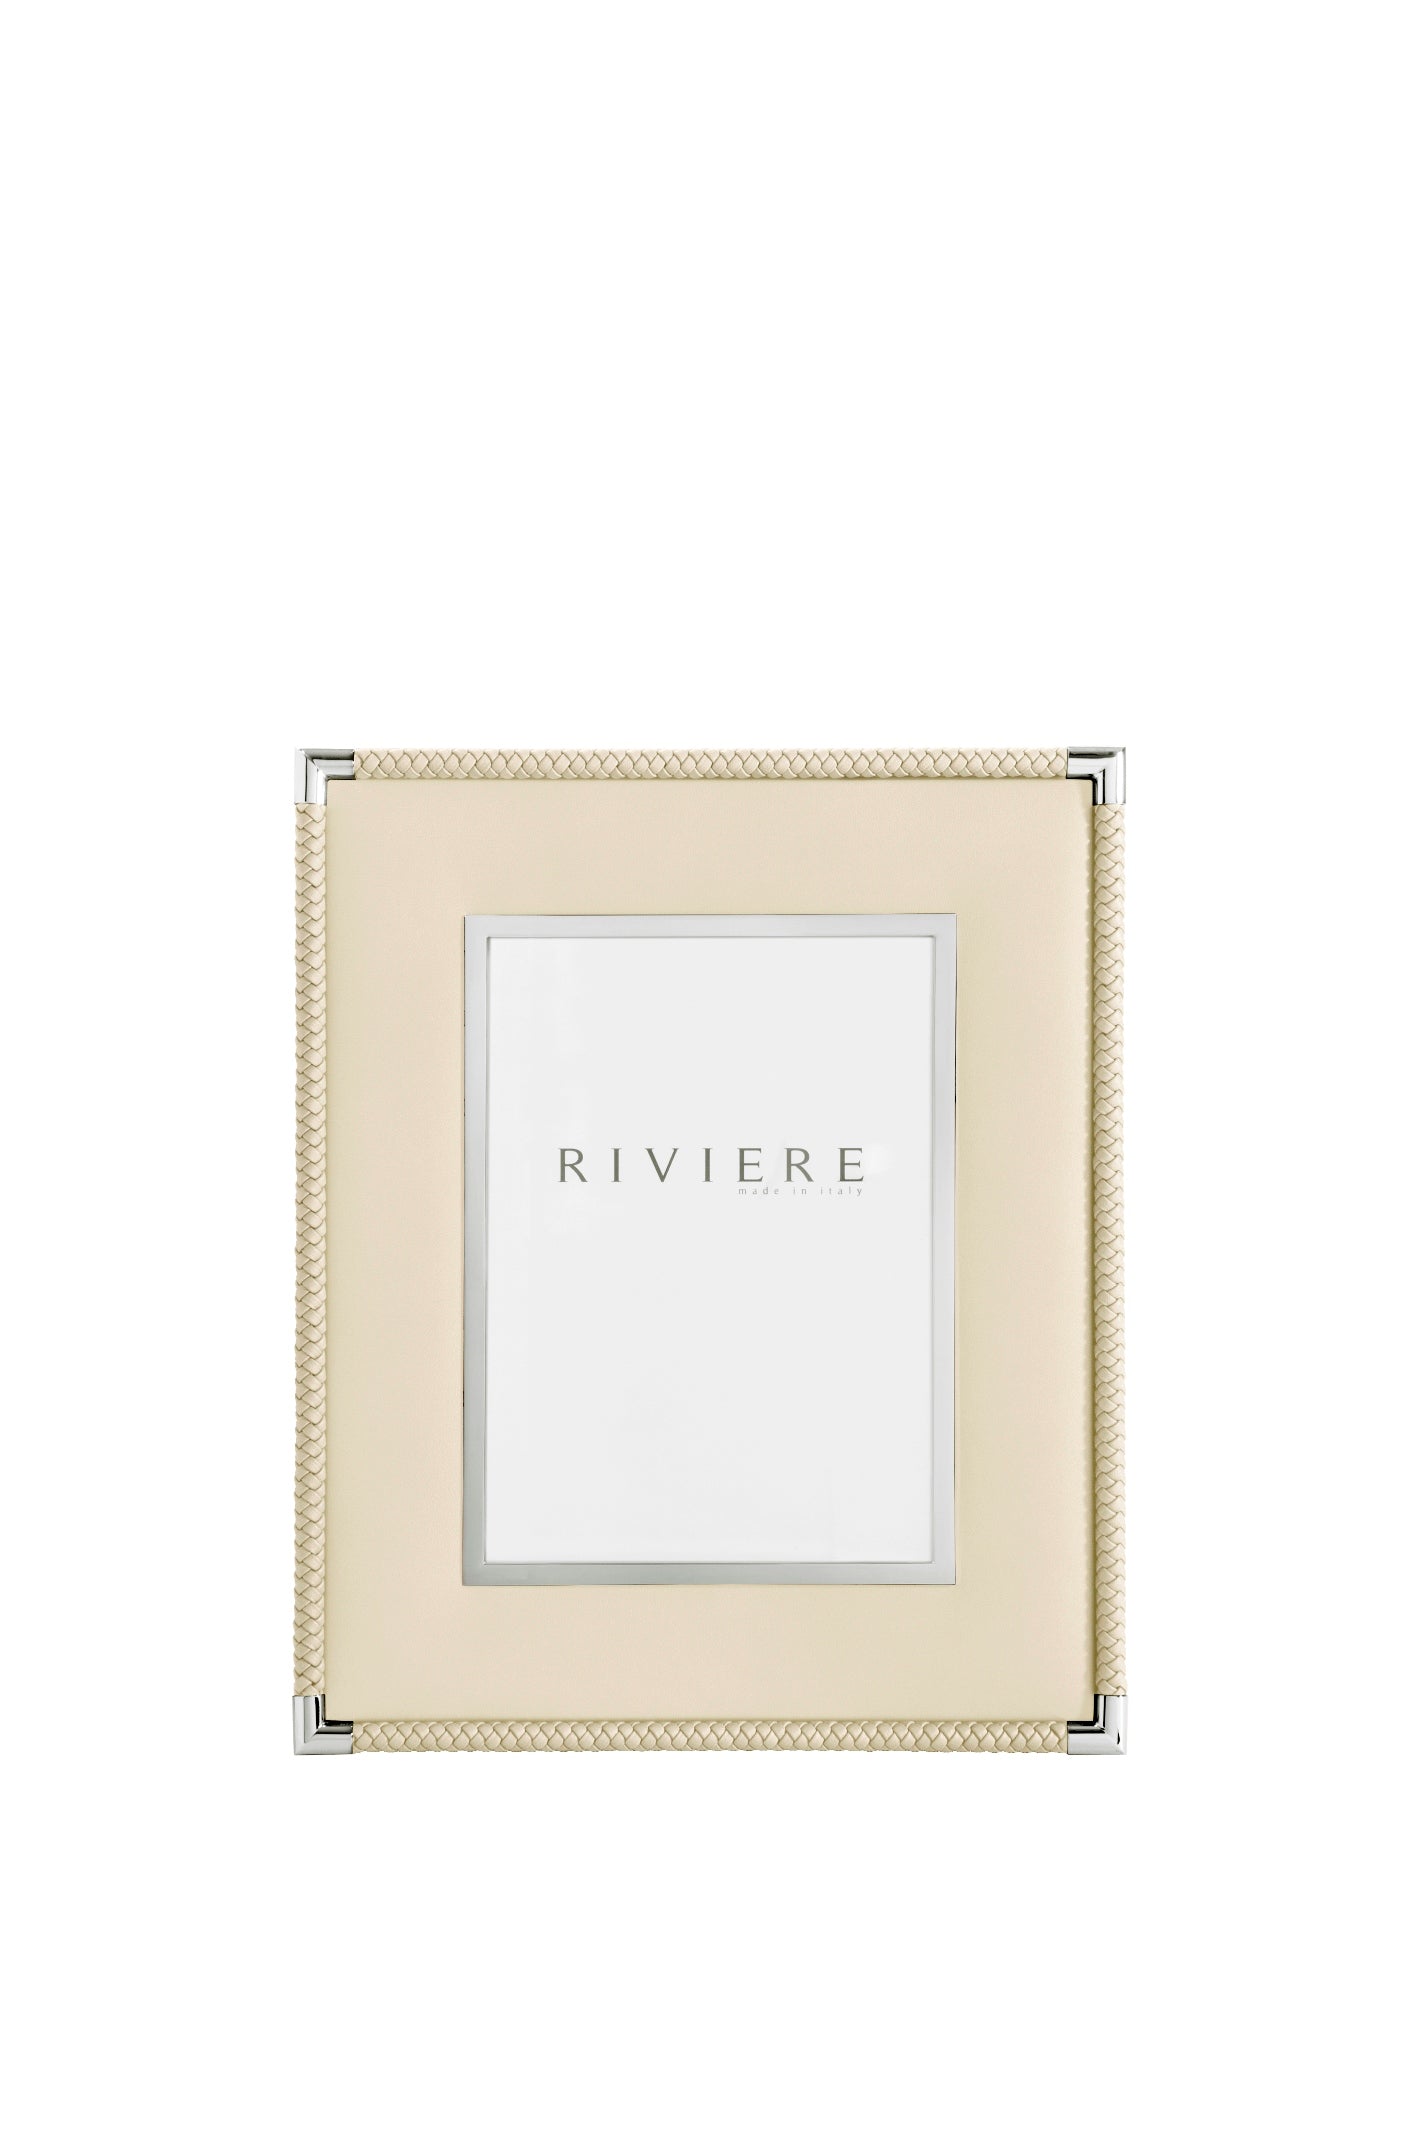 Riviere Thea #2 Leather Picture Frame With Metal Trim | Elegant Leather Frame Design | Inner Chrome or Gold Metal Trim | Outer Braided Trim for Added Sophistication | Perfect for Showcasing Your Precious Memories | Available at 2Jour Concierge, #1 luxury high-end gift & lifestyle shop